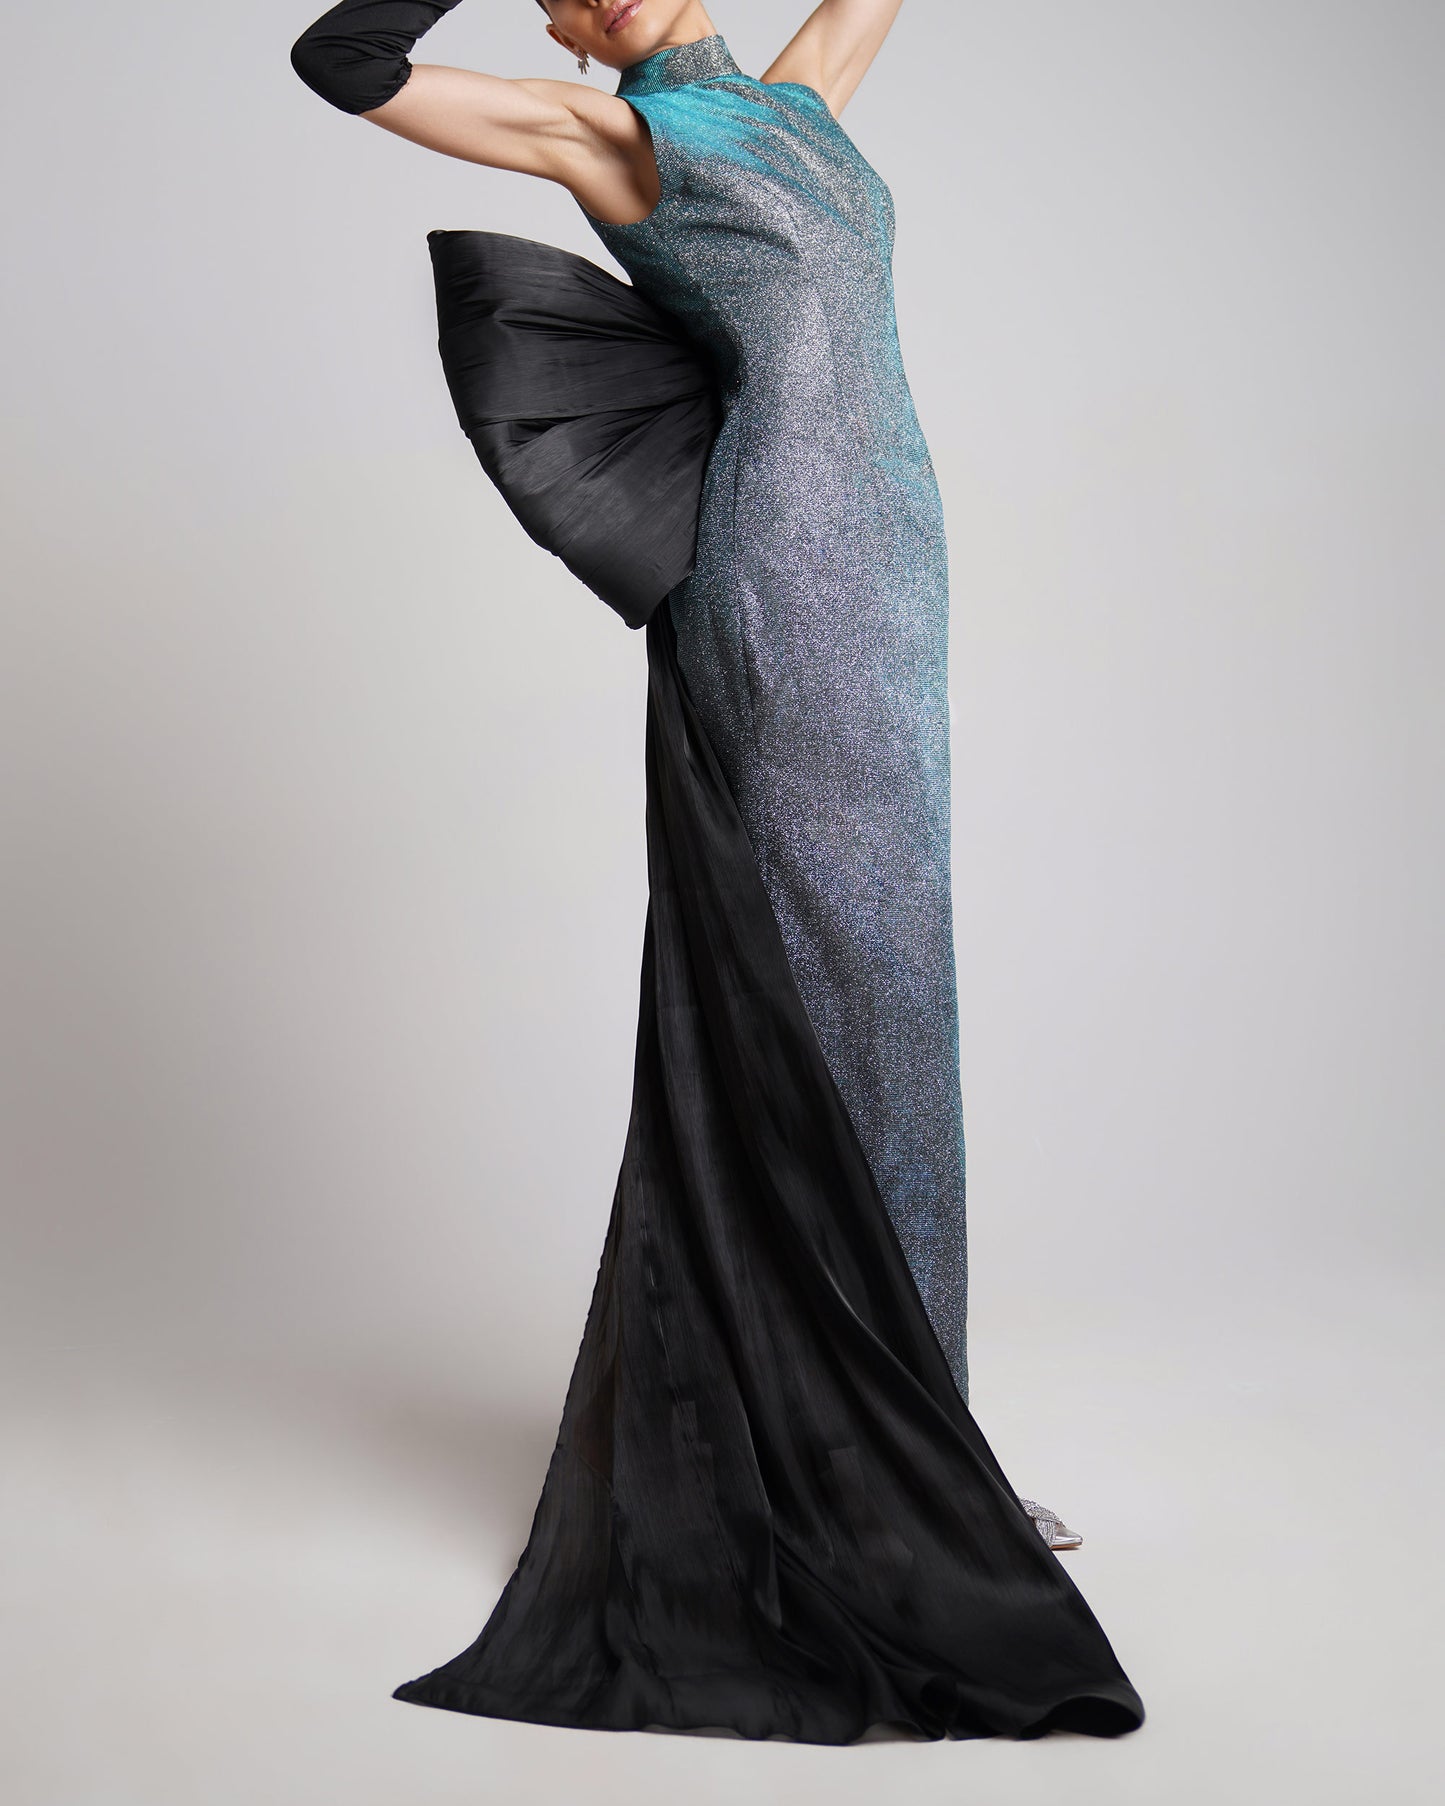 Electra blue metallic gown with bow detail